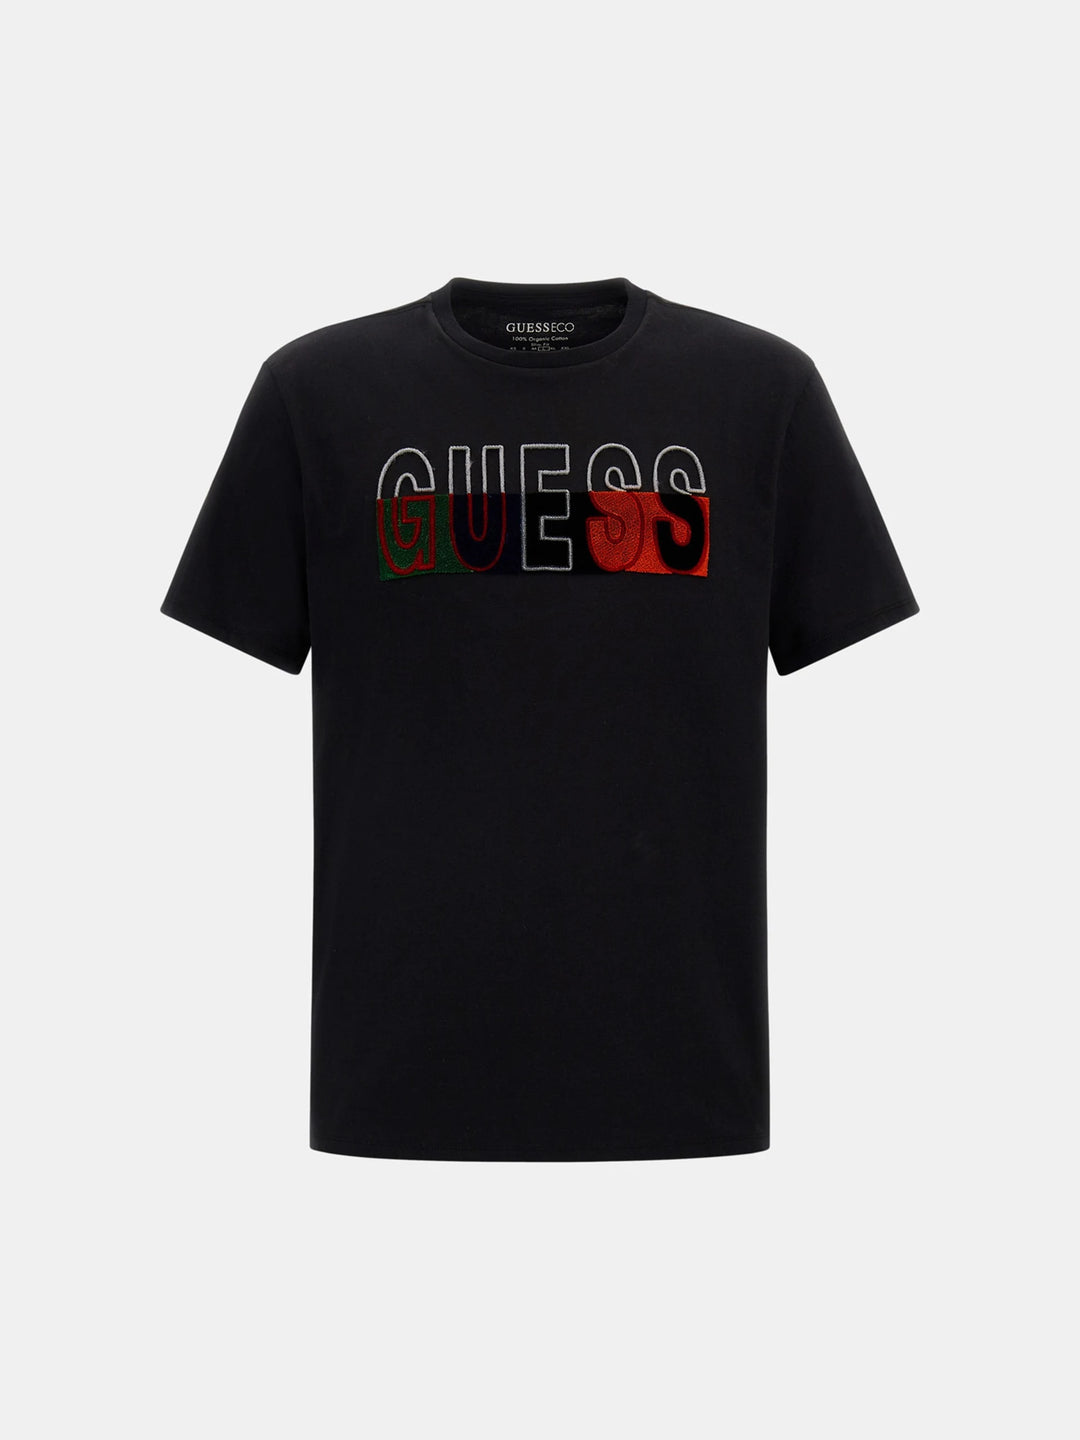 SS BSC GUESS CHENILLE LOGO TEE